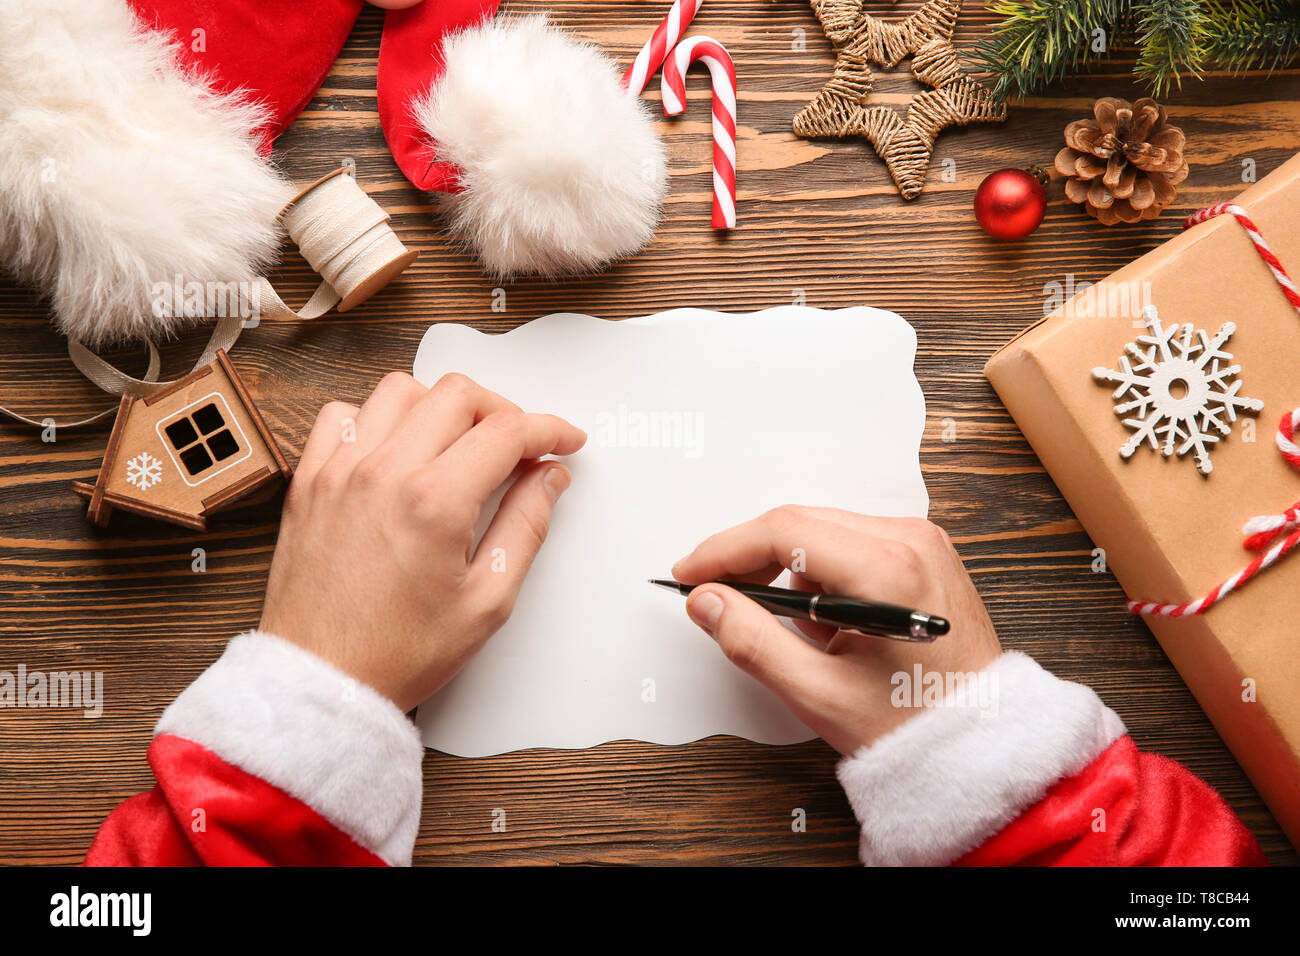 Santa Claus writing letter on wooden table Stock Photo - Alamy